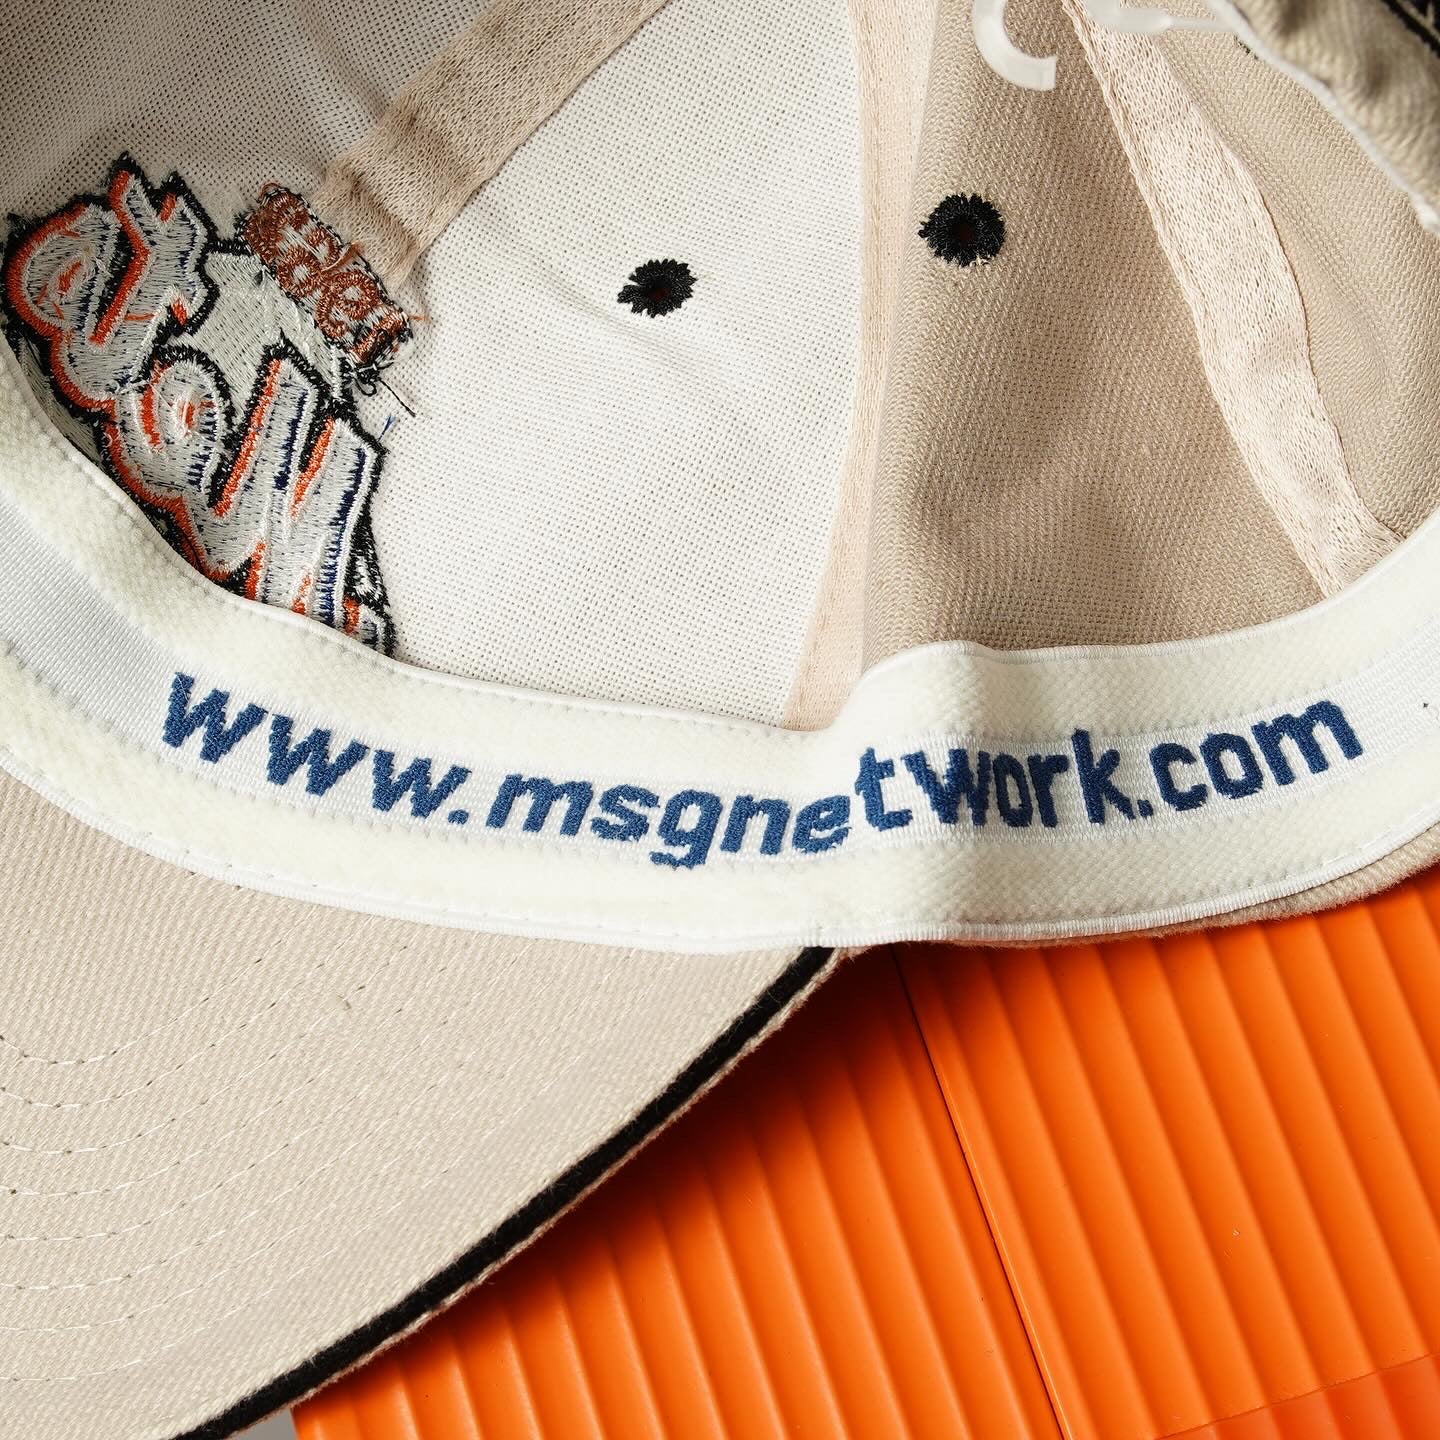 New York Mets 1962-2002 40th Anniversary Cap by FOX MSG NETWORK